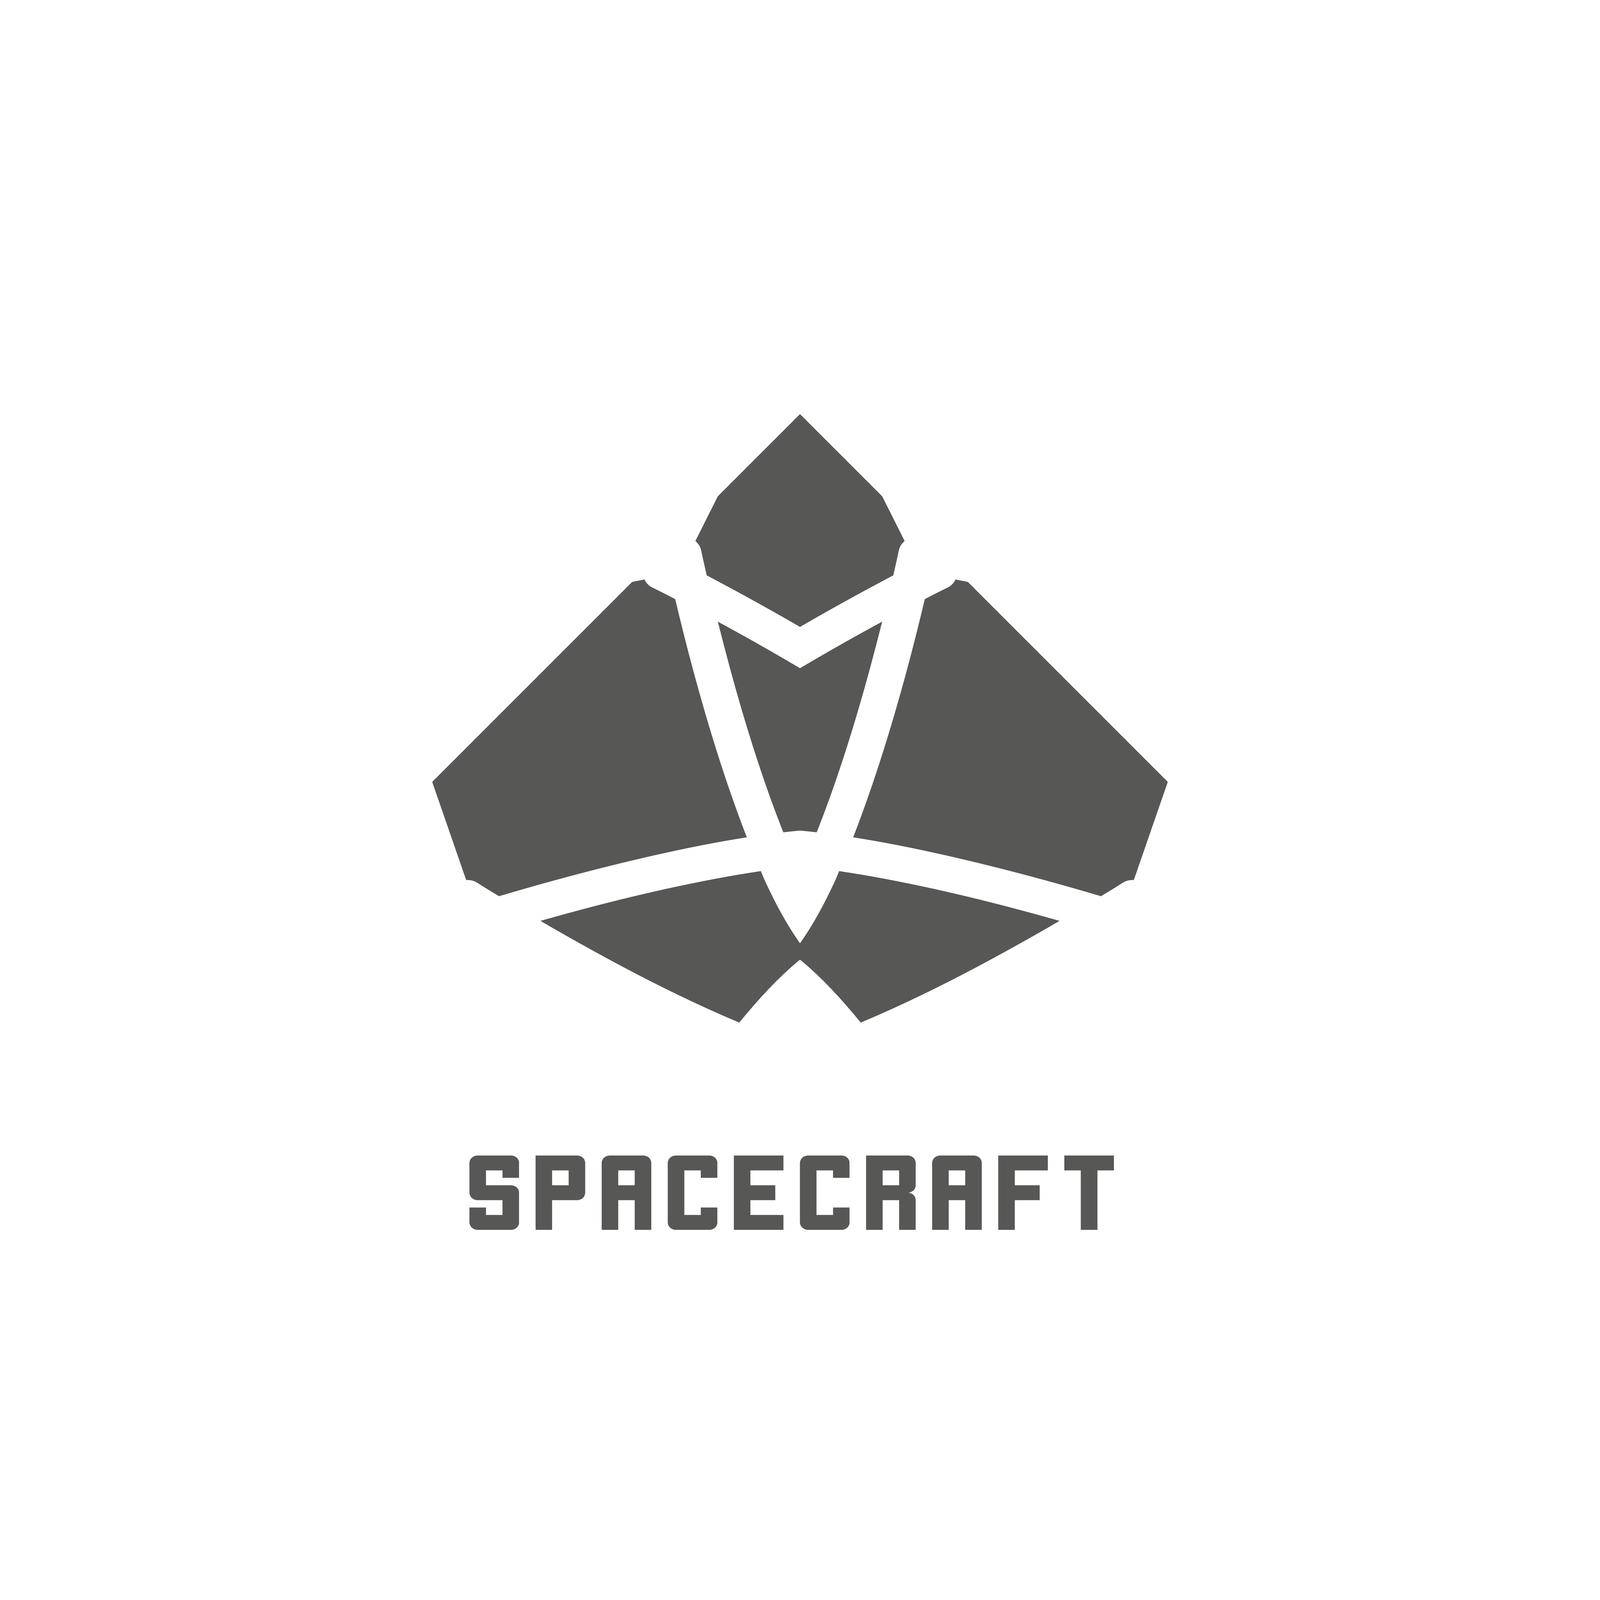 Abstract spacecraft logo design. Vector geometric symbol isolated on white